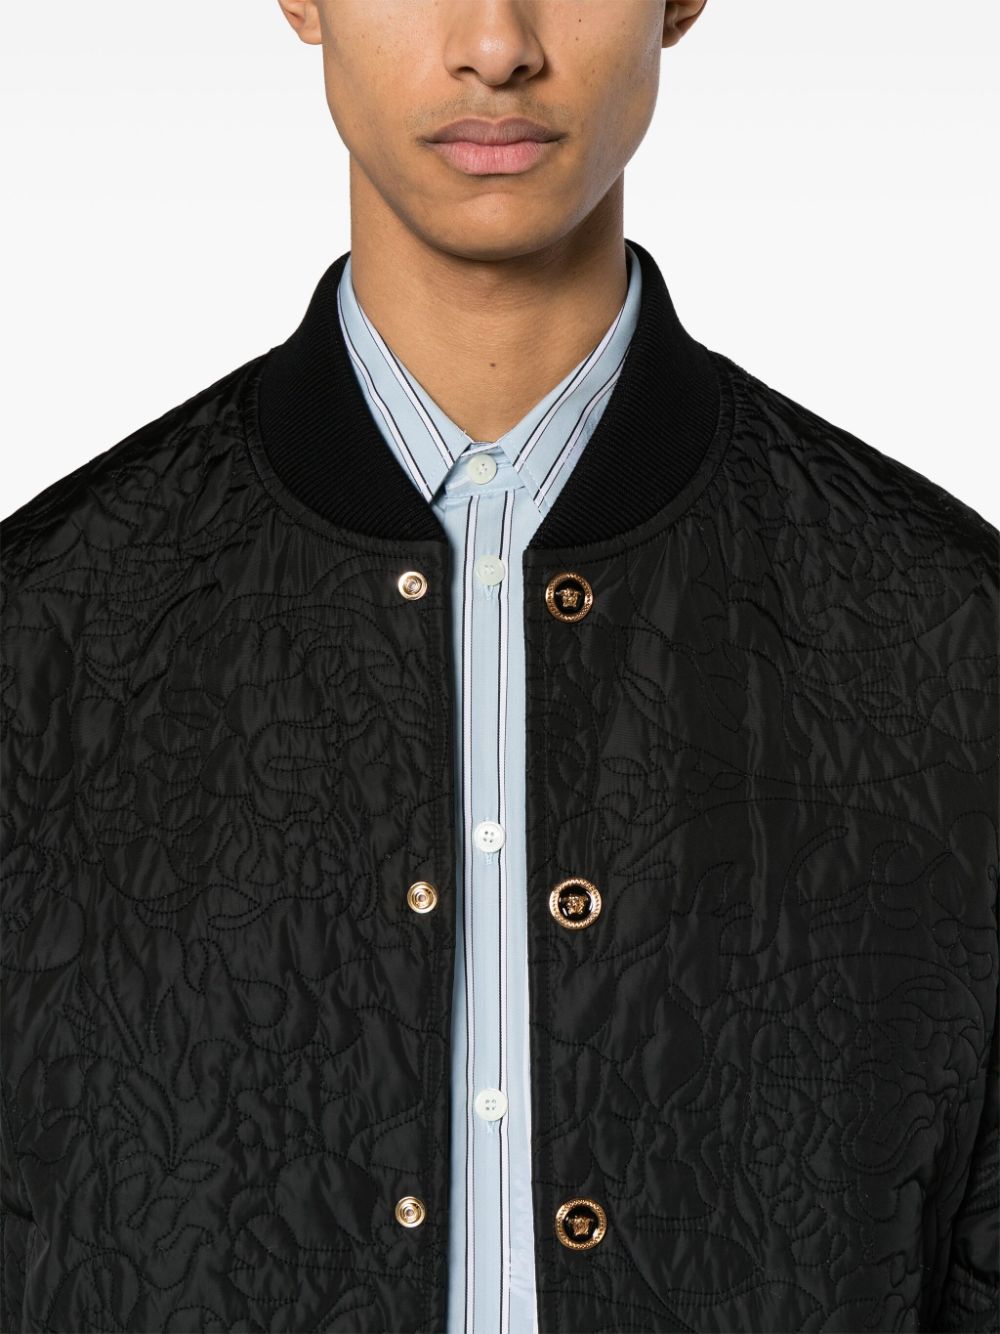 Barocco-quilted bomber jacket<BR/><BR/><BR/>